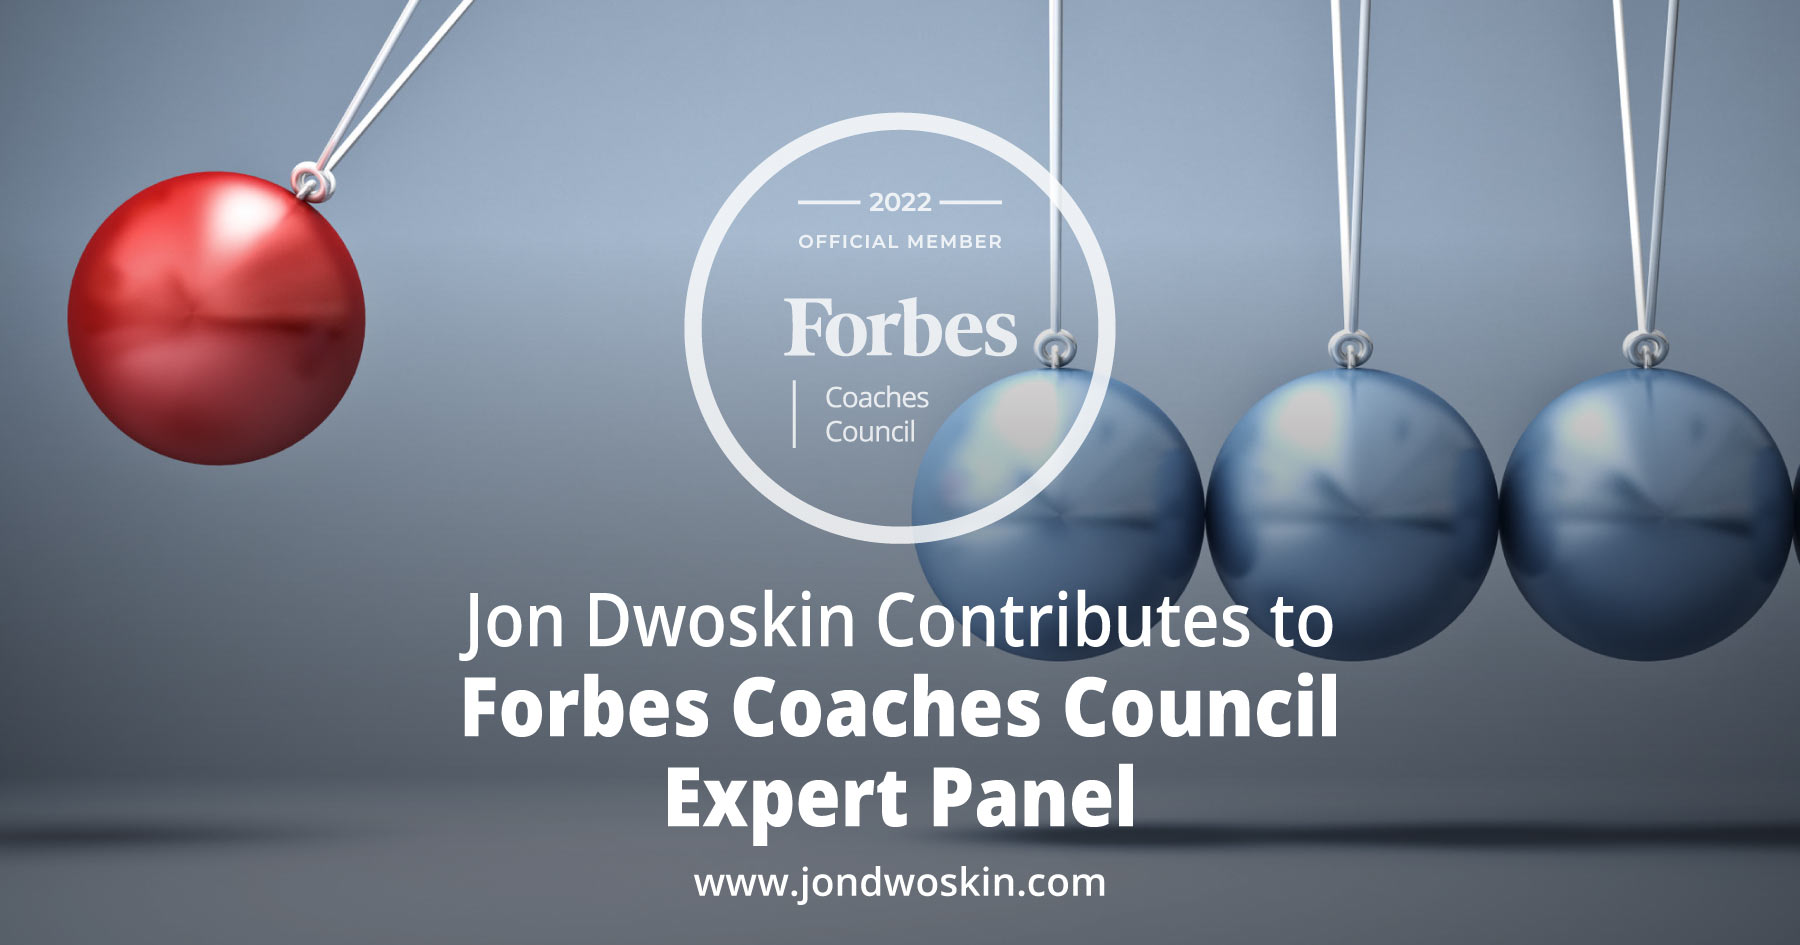 Jon Dwoskin Contributes to Forbes Coaches Council Expert Panel: 11 Critical Aspects Of An Effective Business Continuity Strategy